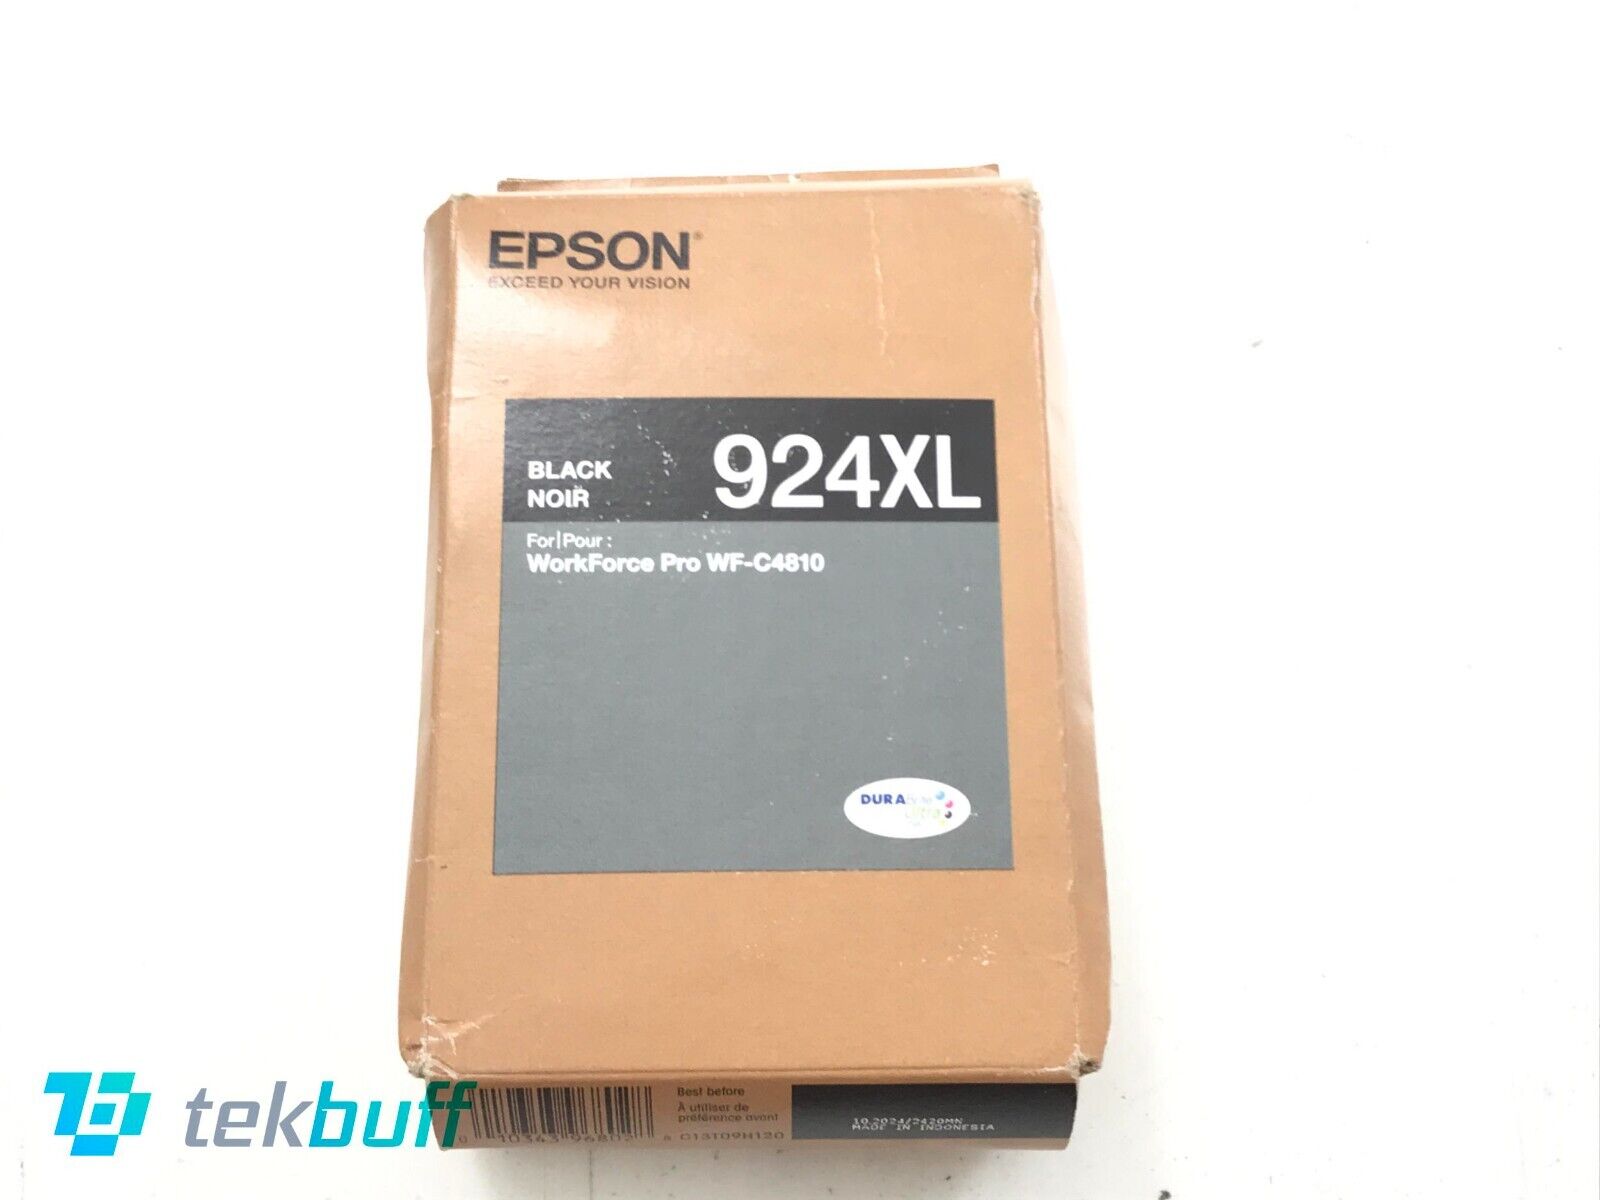 Epson T924XL120 Black Ink Cartridge - High Yield for C4310/C4810